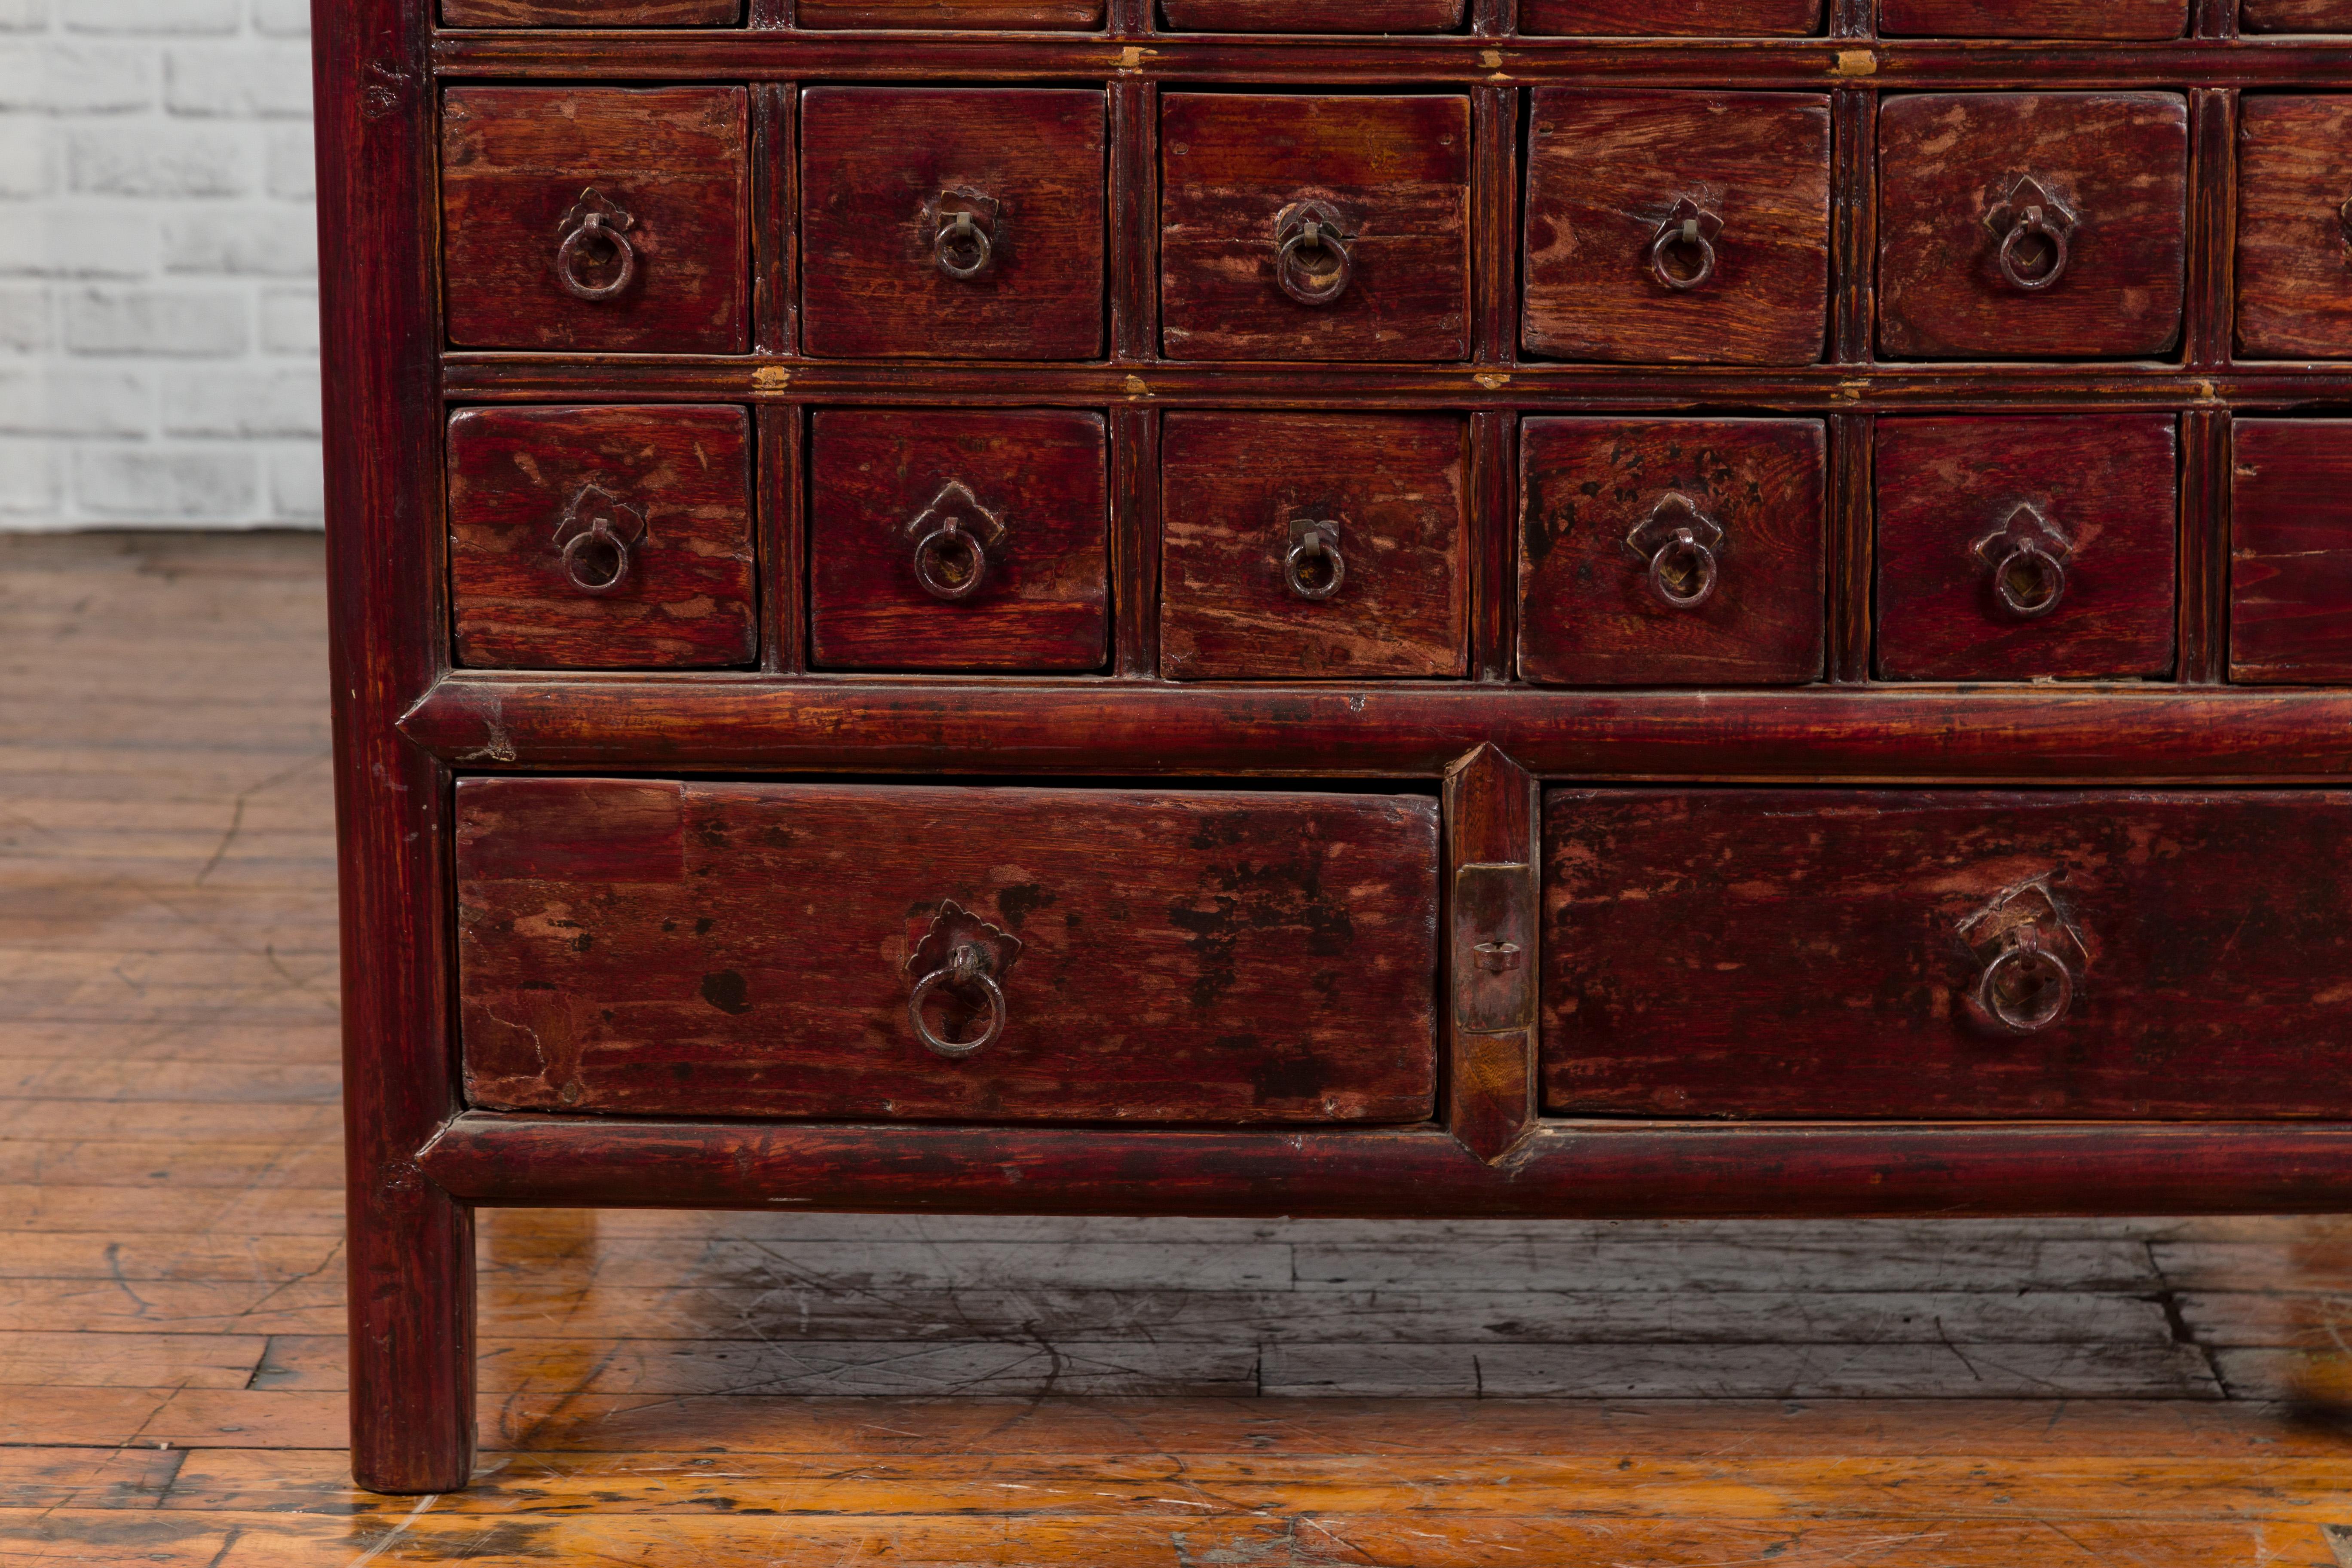 Chinese Qing Dynasty Period Apothecary Chest with 32 Drawers and Aged Patina For Sale 4